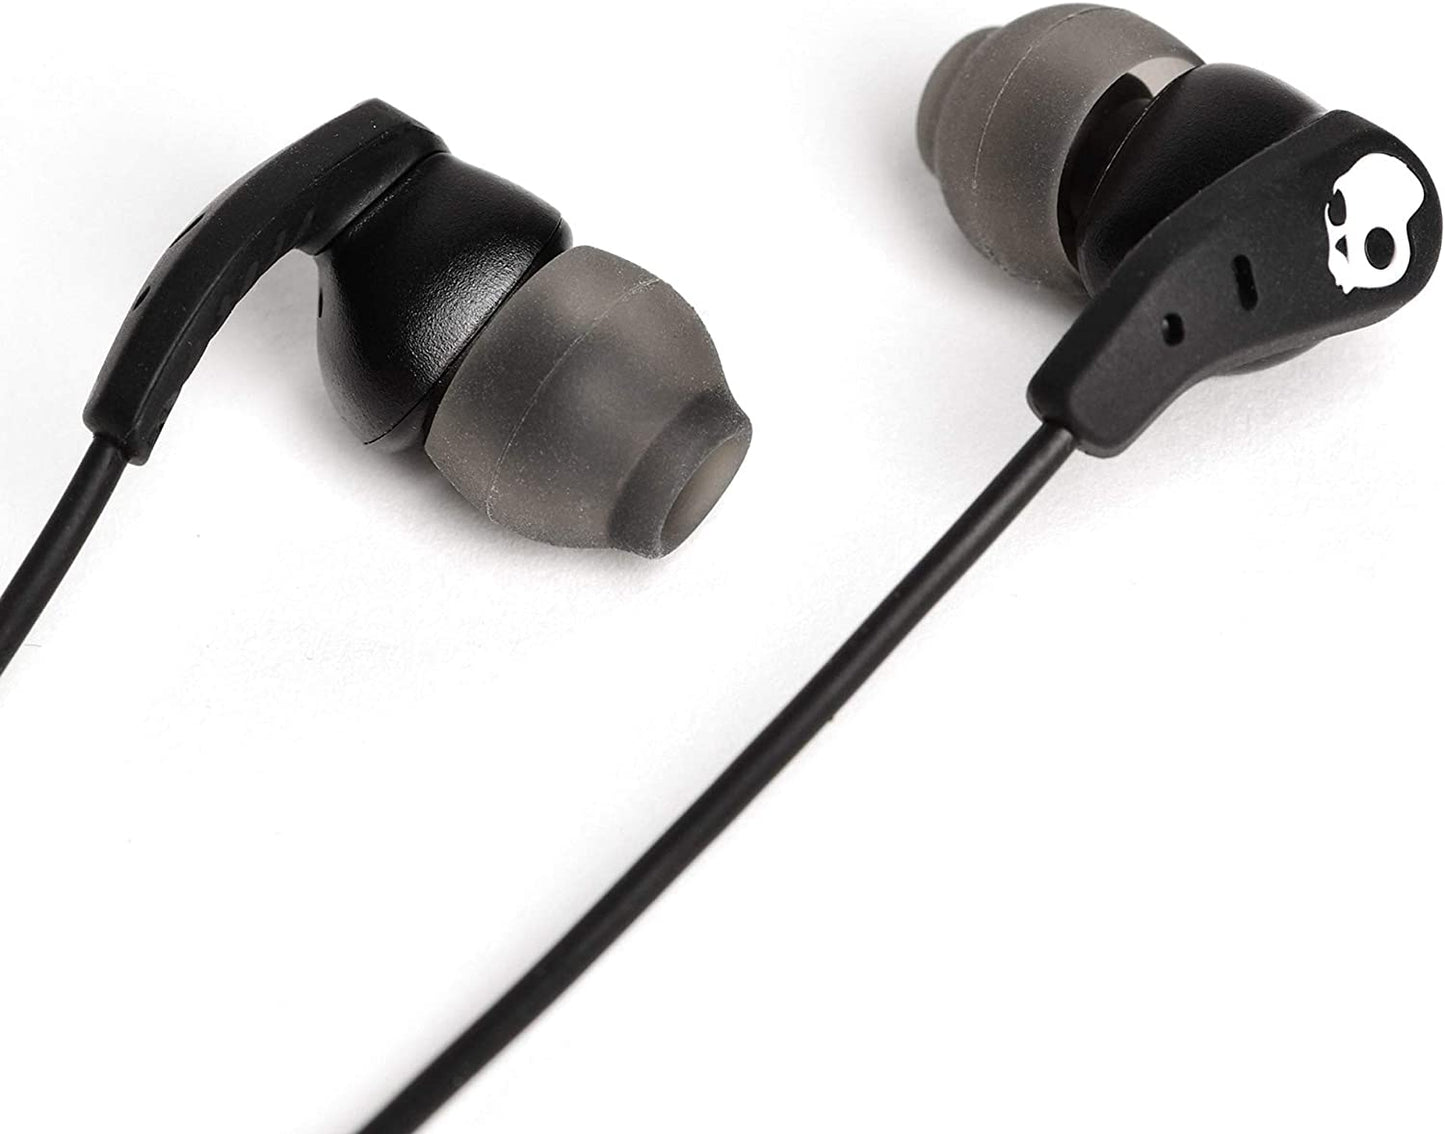 Skullcandy Set Sweat and Water Resistant In-Ear Earbuds with Microphone (TRUE BLACK) | Model S2SGY-N740